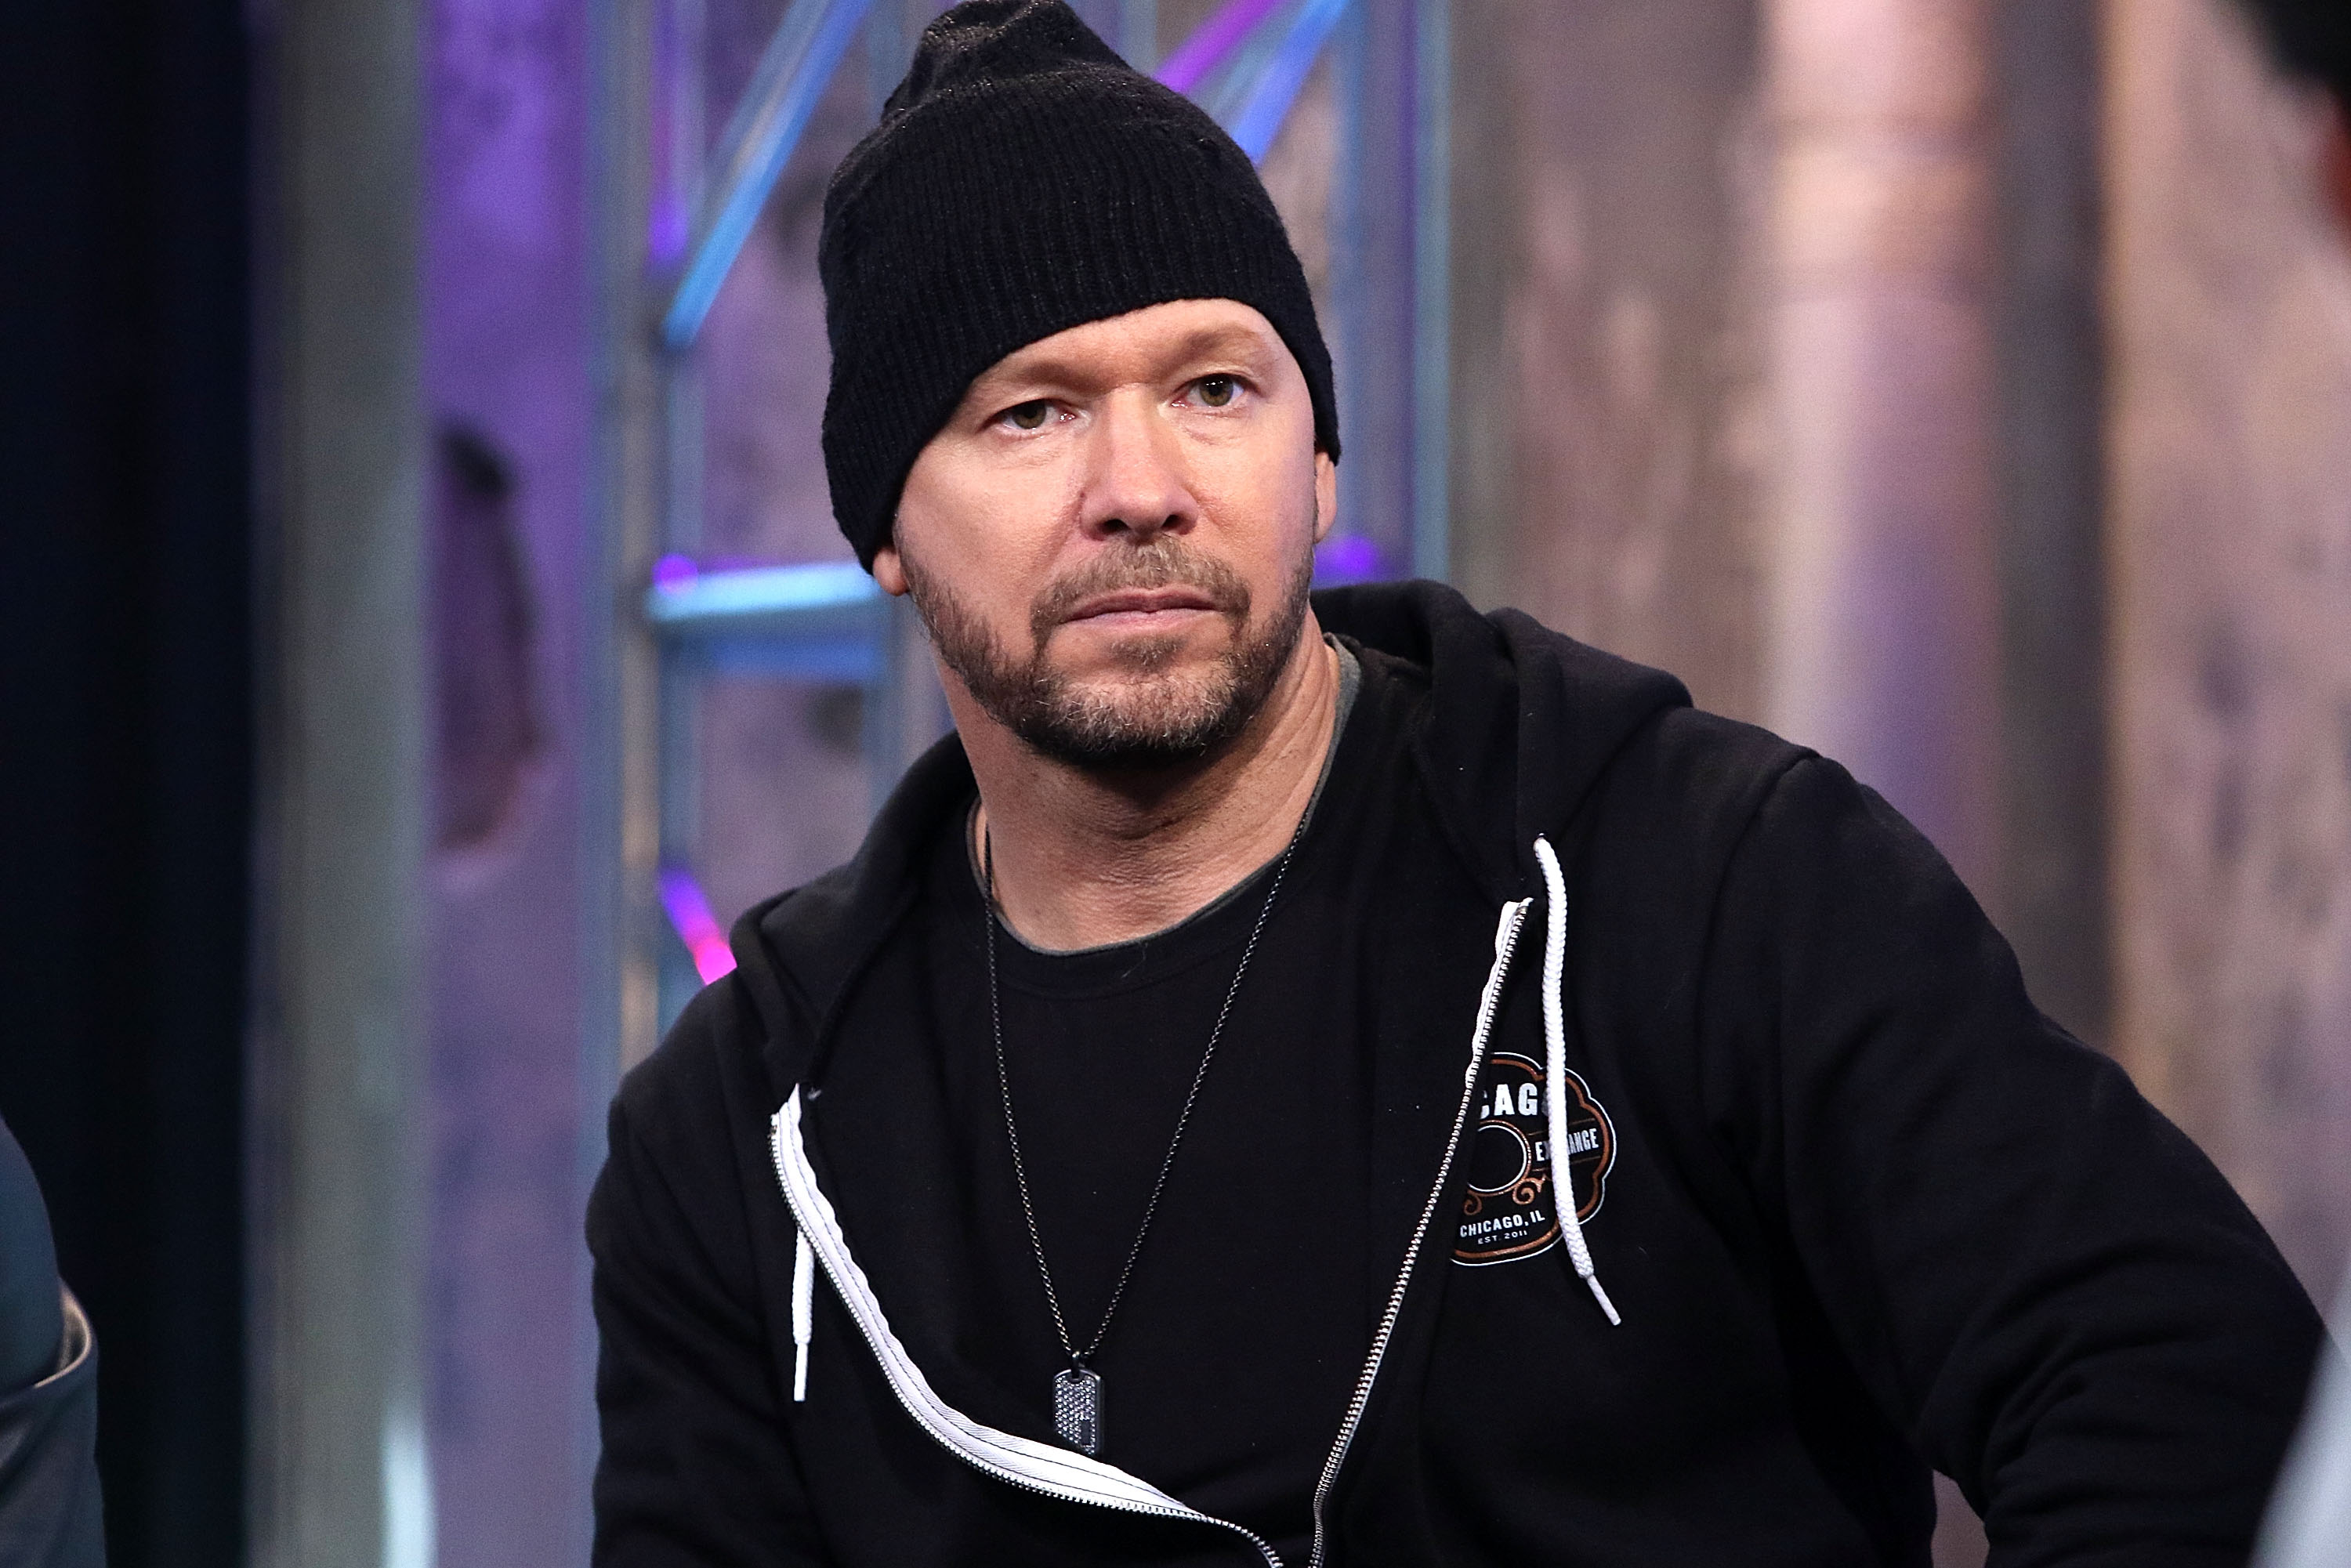 30 Facts about Actor Donnie Wahlberg Who Plays Danny Reagan in 'Blue